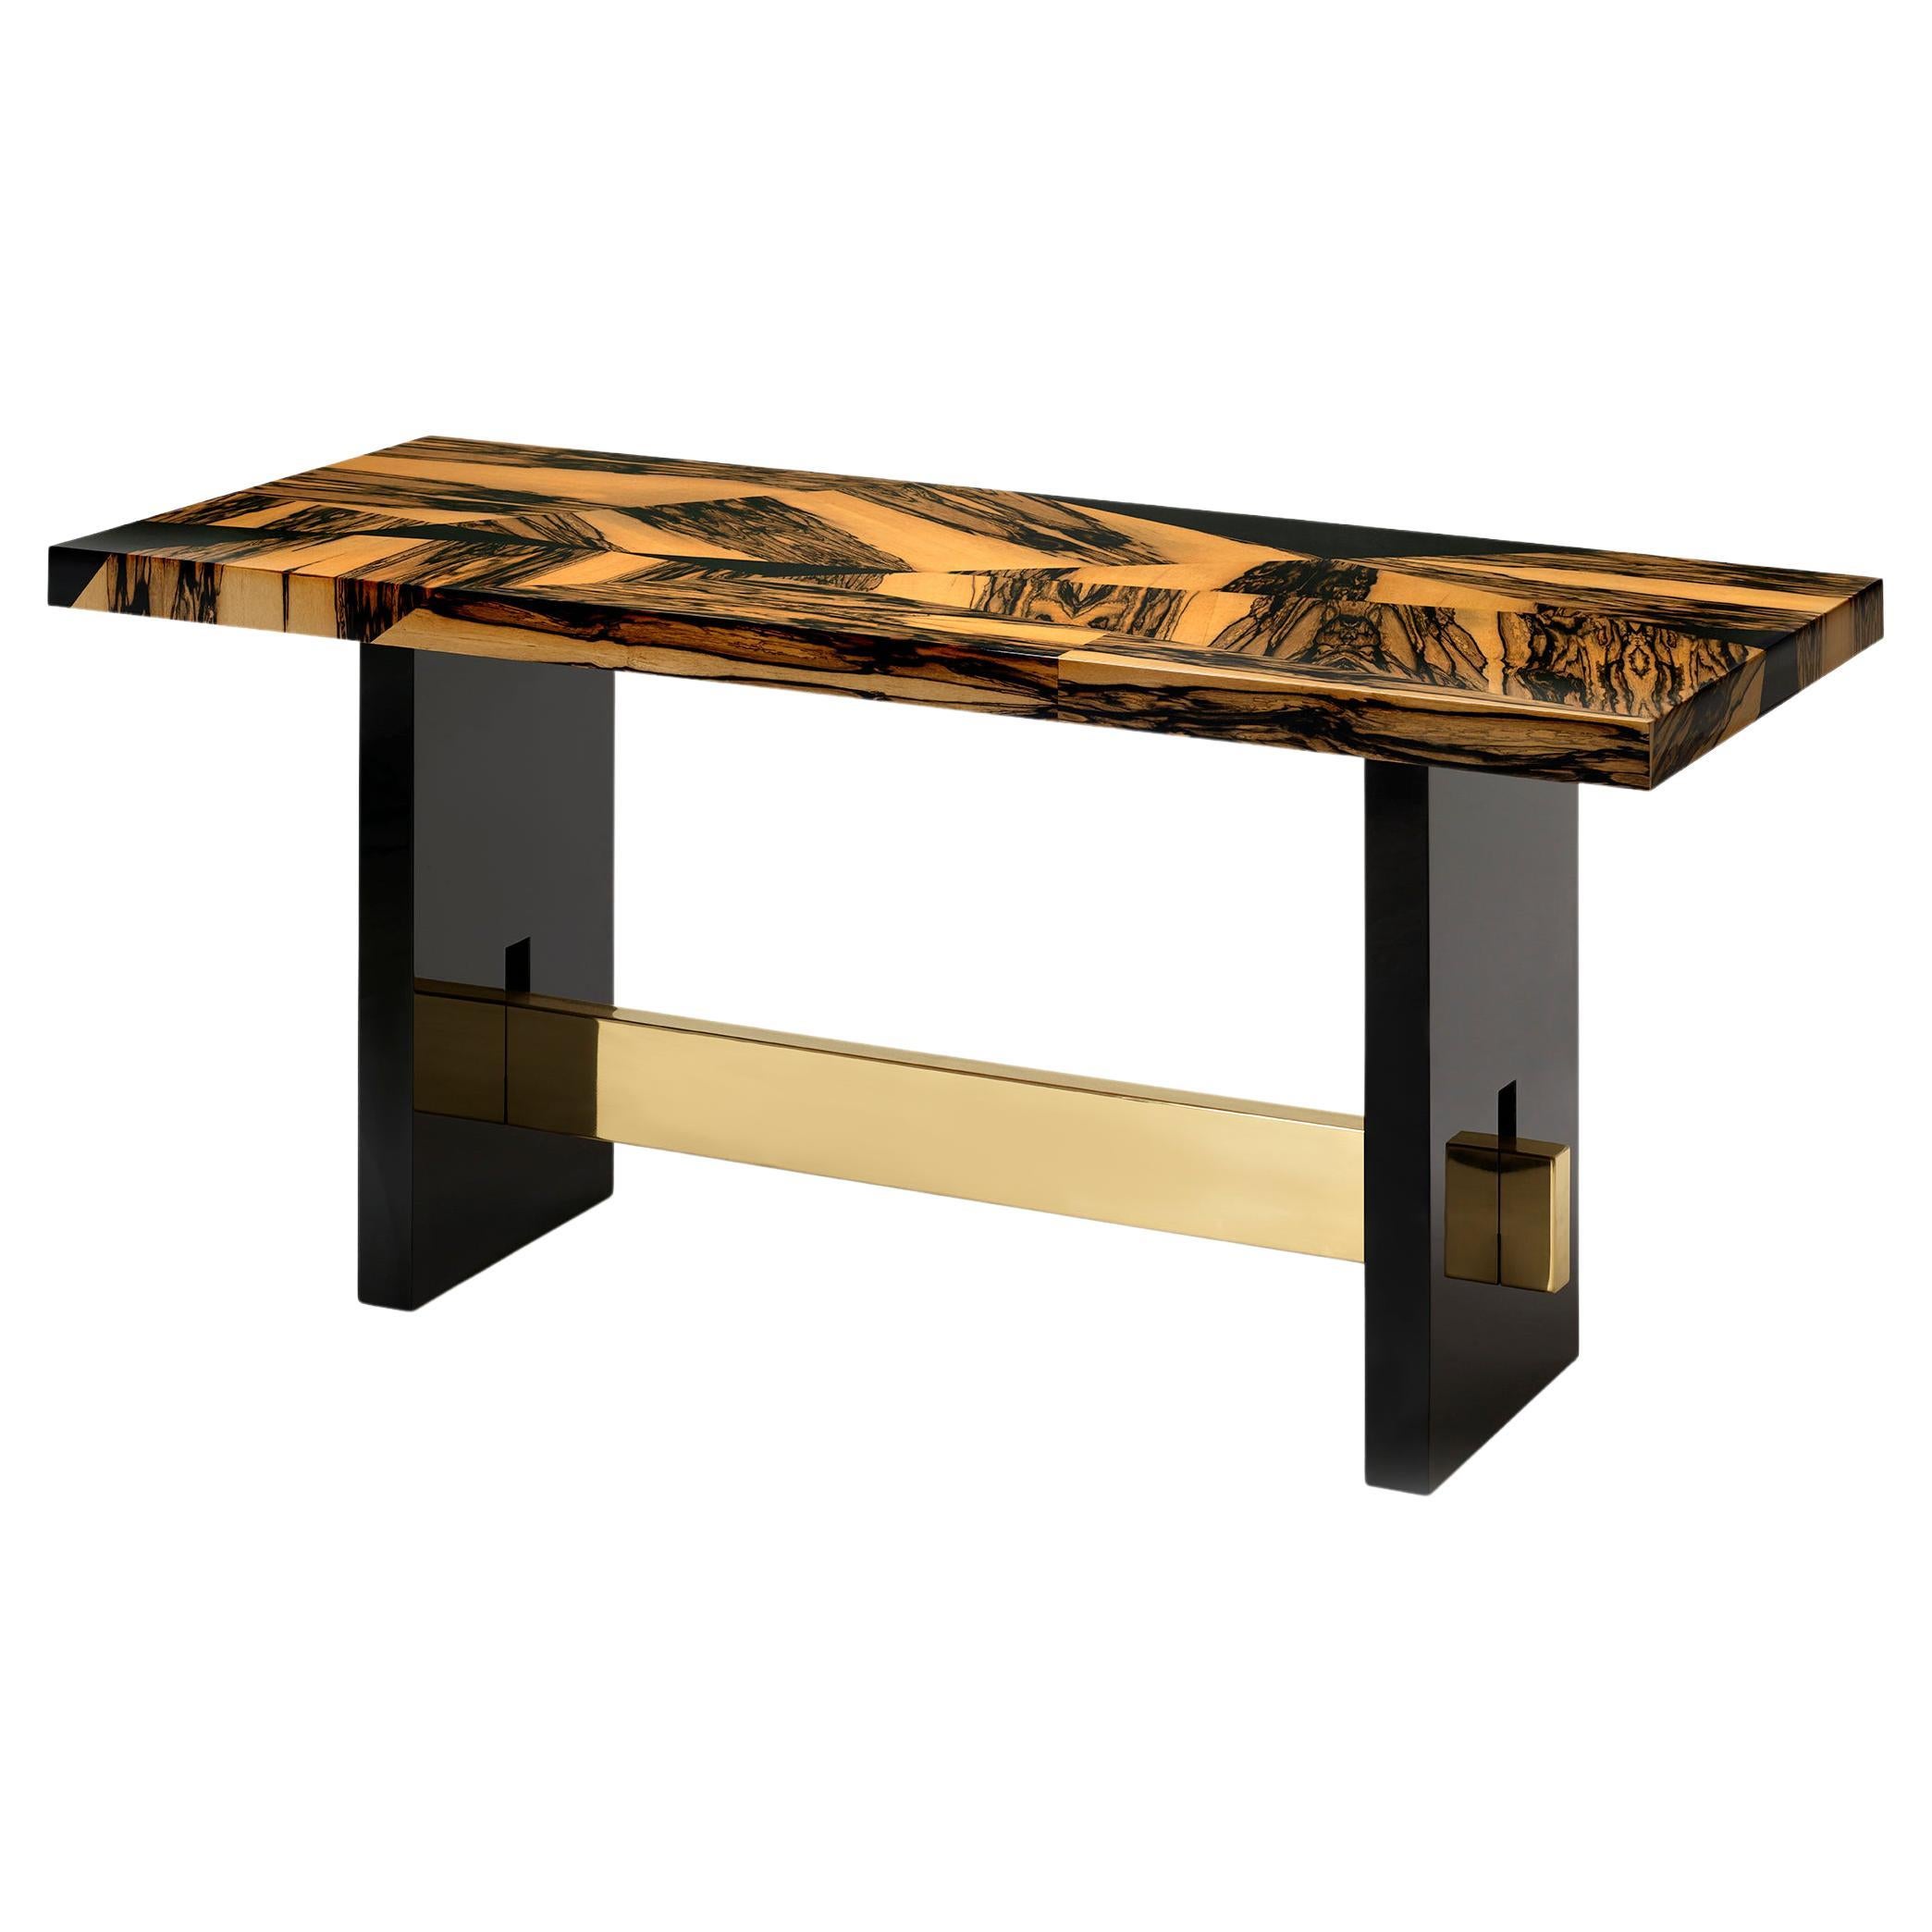 Geometry Console Table, Ebony Marquetry and Brass Details, Handcrafted by Duistt